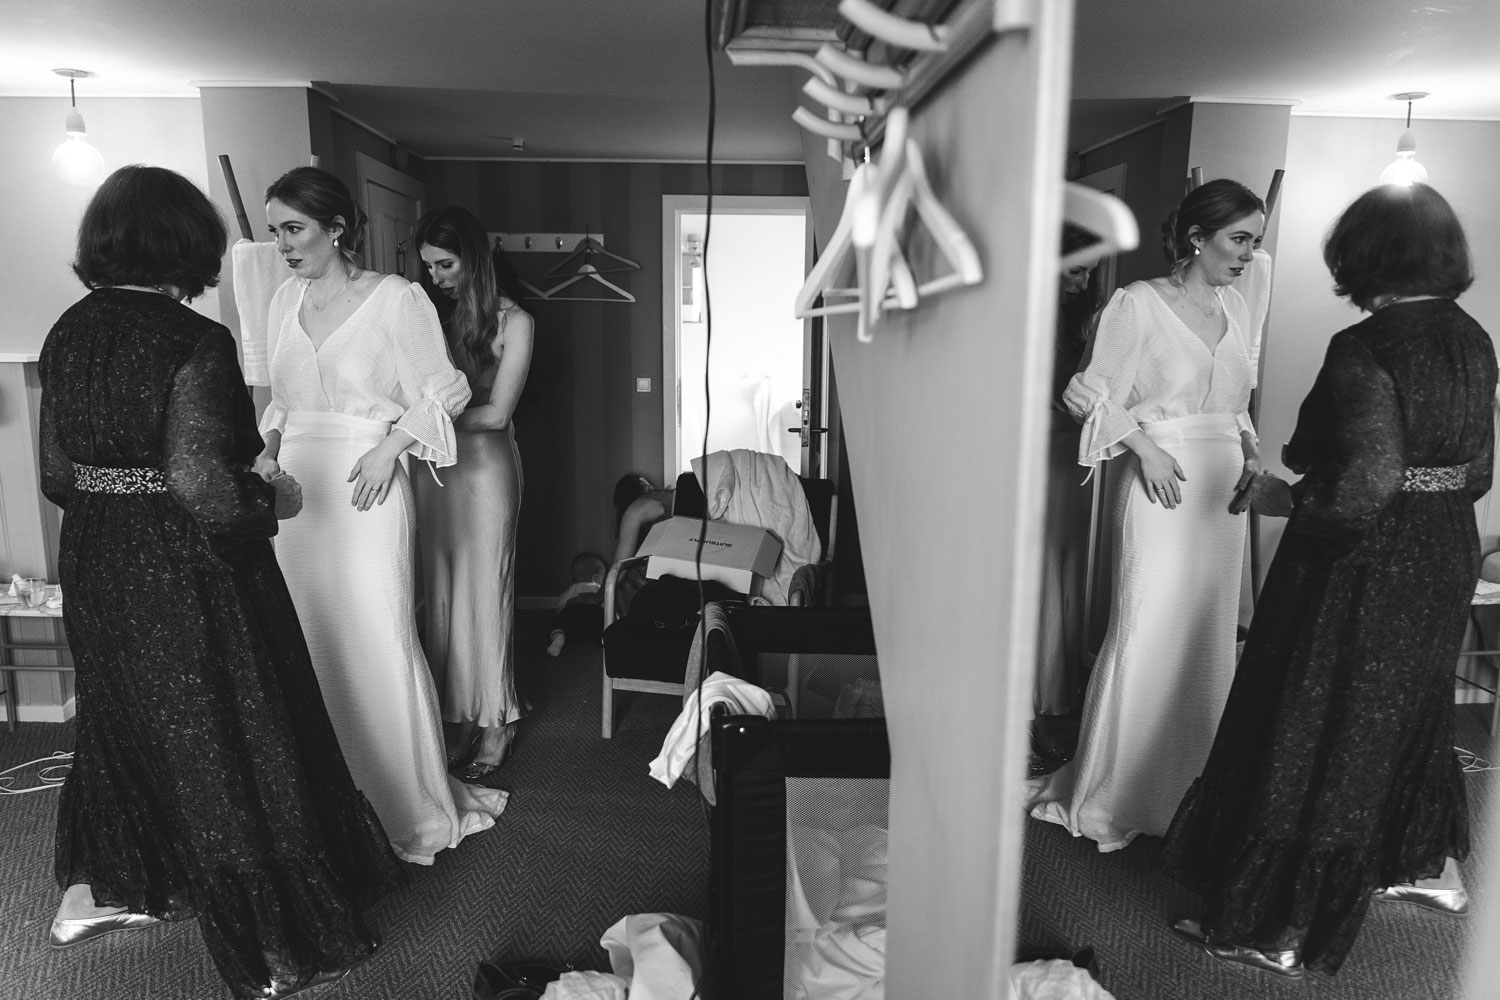 Capturing the bride's final moments of preparation